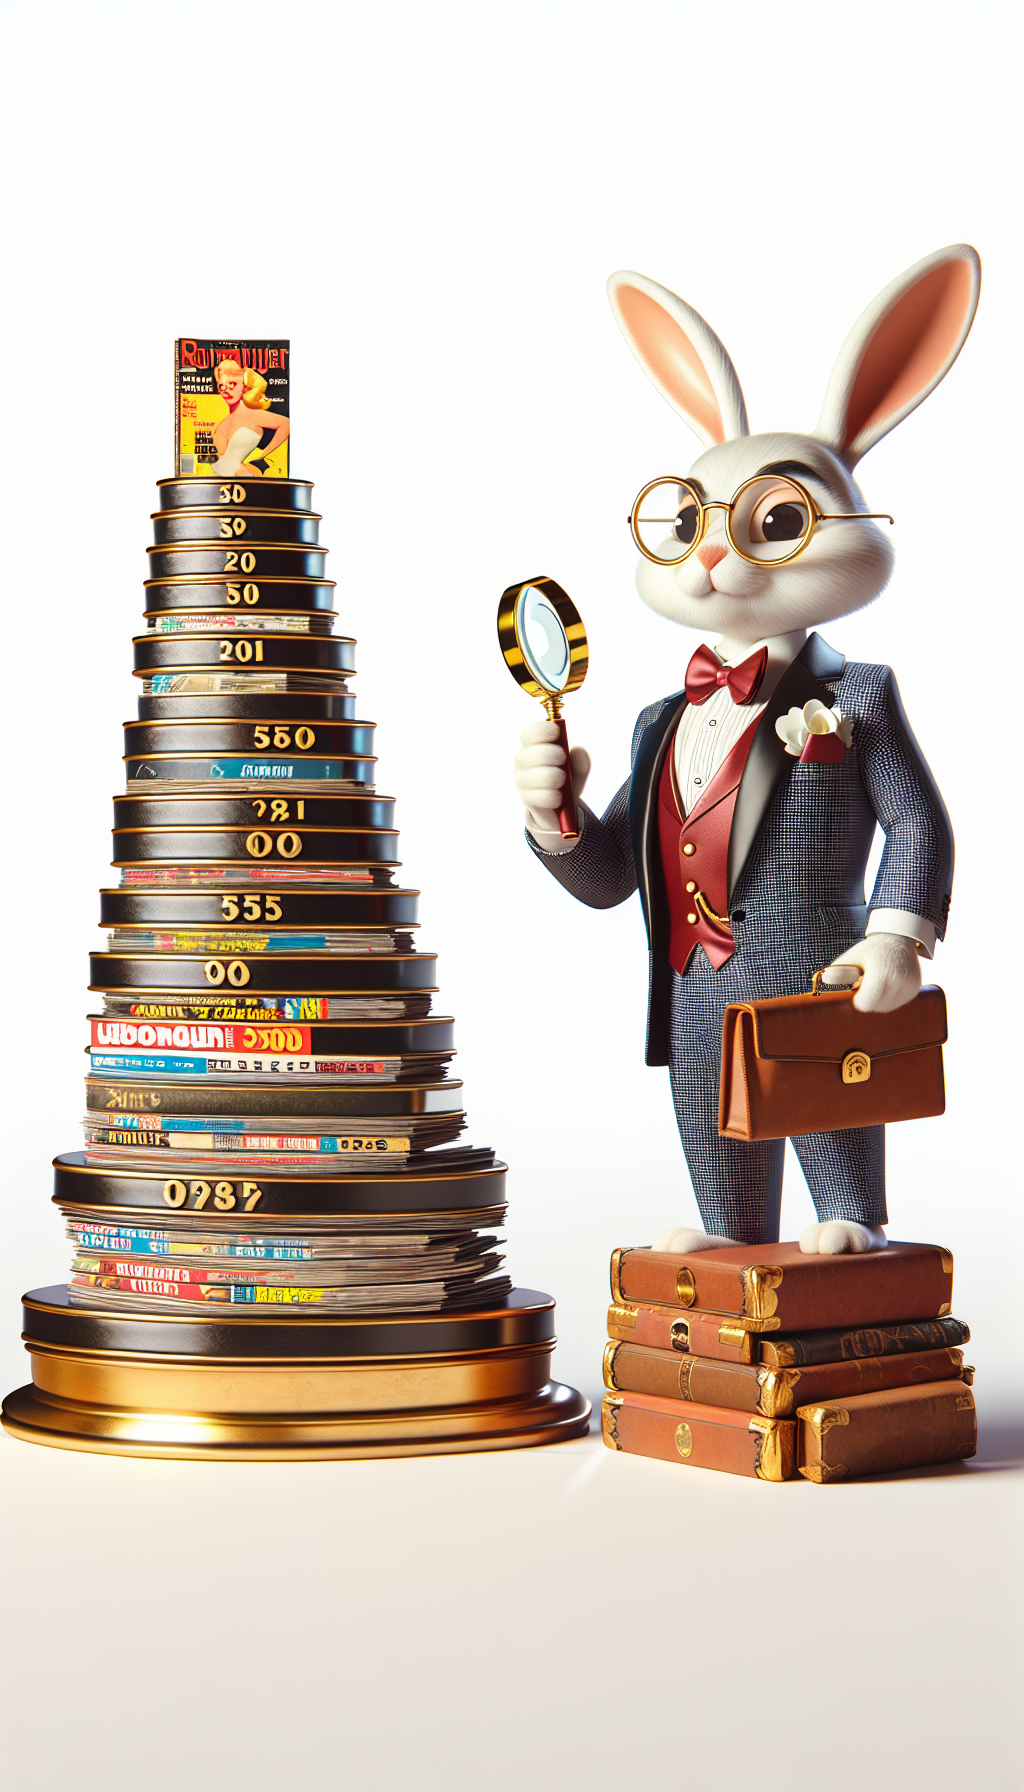 An anthropomorphic, suave bunny in vintage attire, holding a magnifying glass, stands beside a towering rarity scale that uses Playboy magazine covers instead of numbers. The covers ascend from common to rare, with the topmost shining like a prized artifact. The bunny's other paw is protectively placed on a pedestal showcasing a pristine, golden-hued, rarest edition, emphasizing its value.